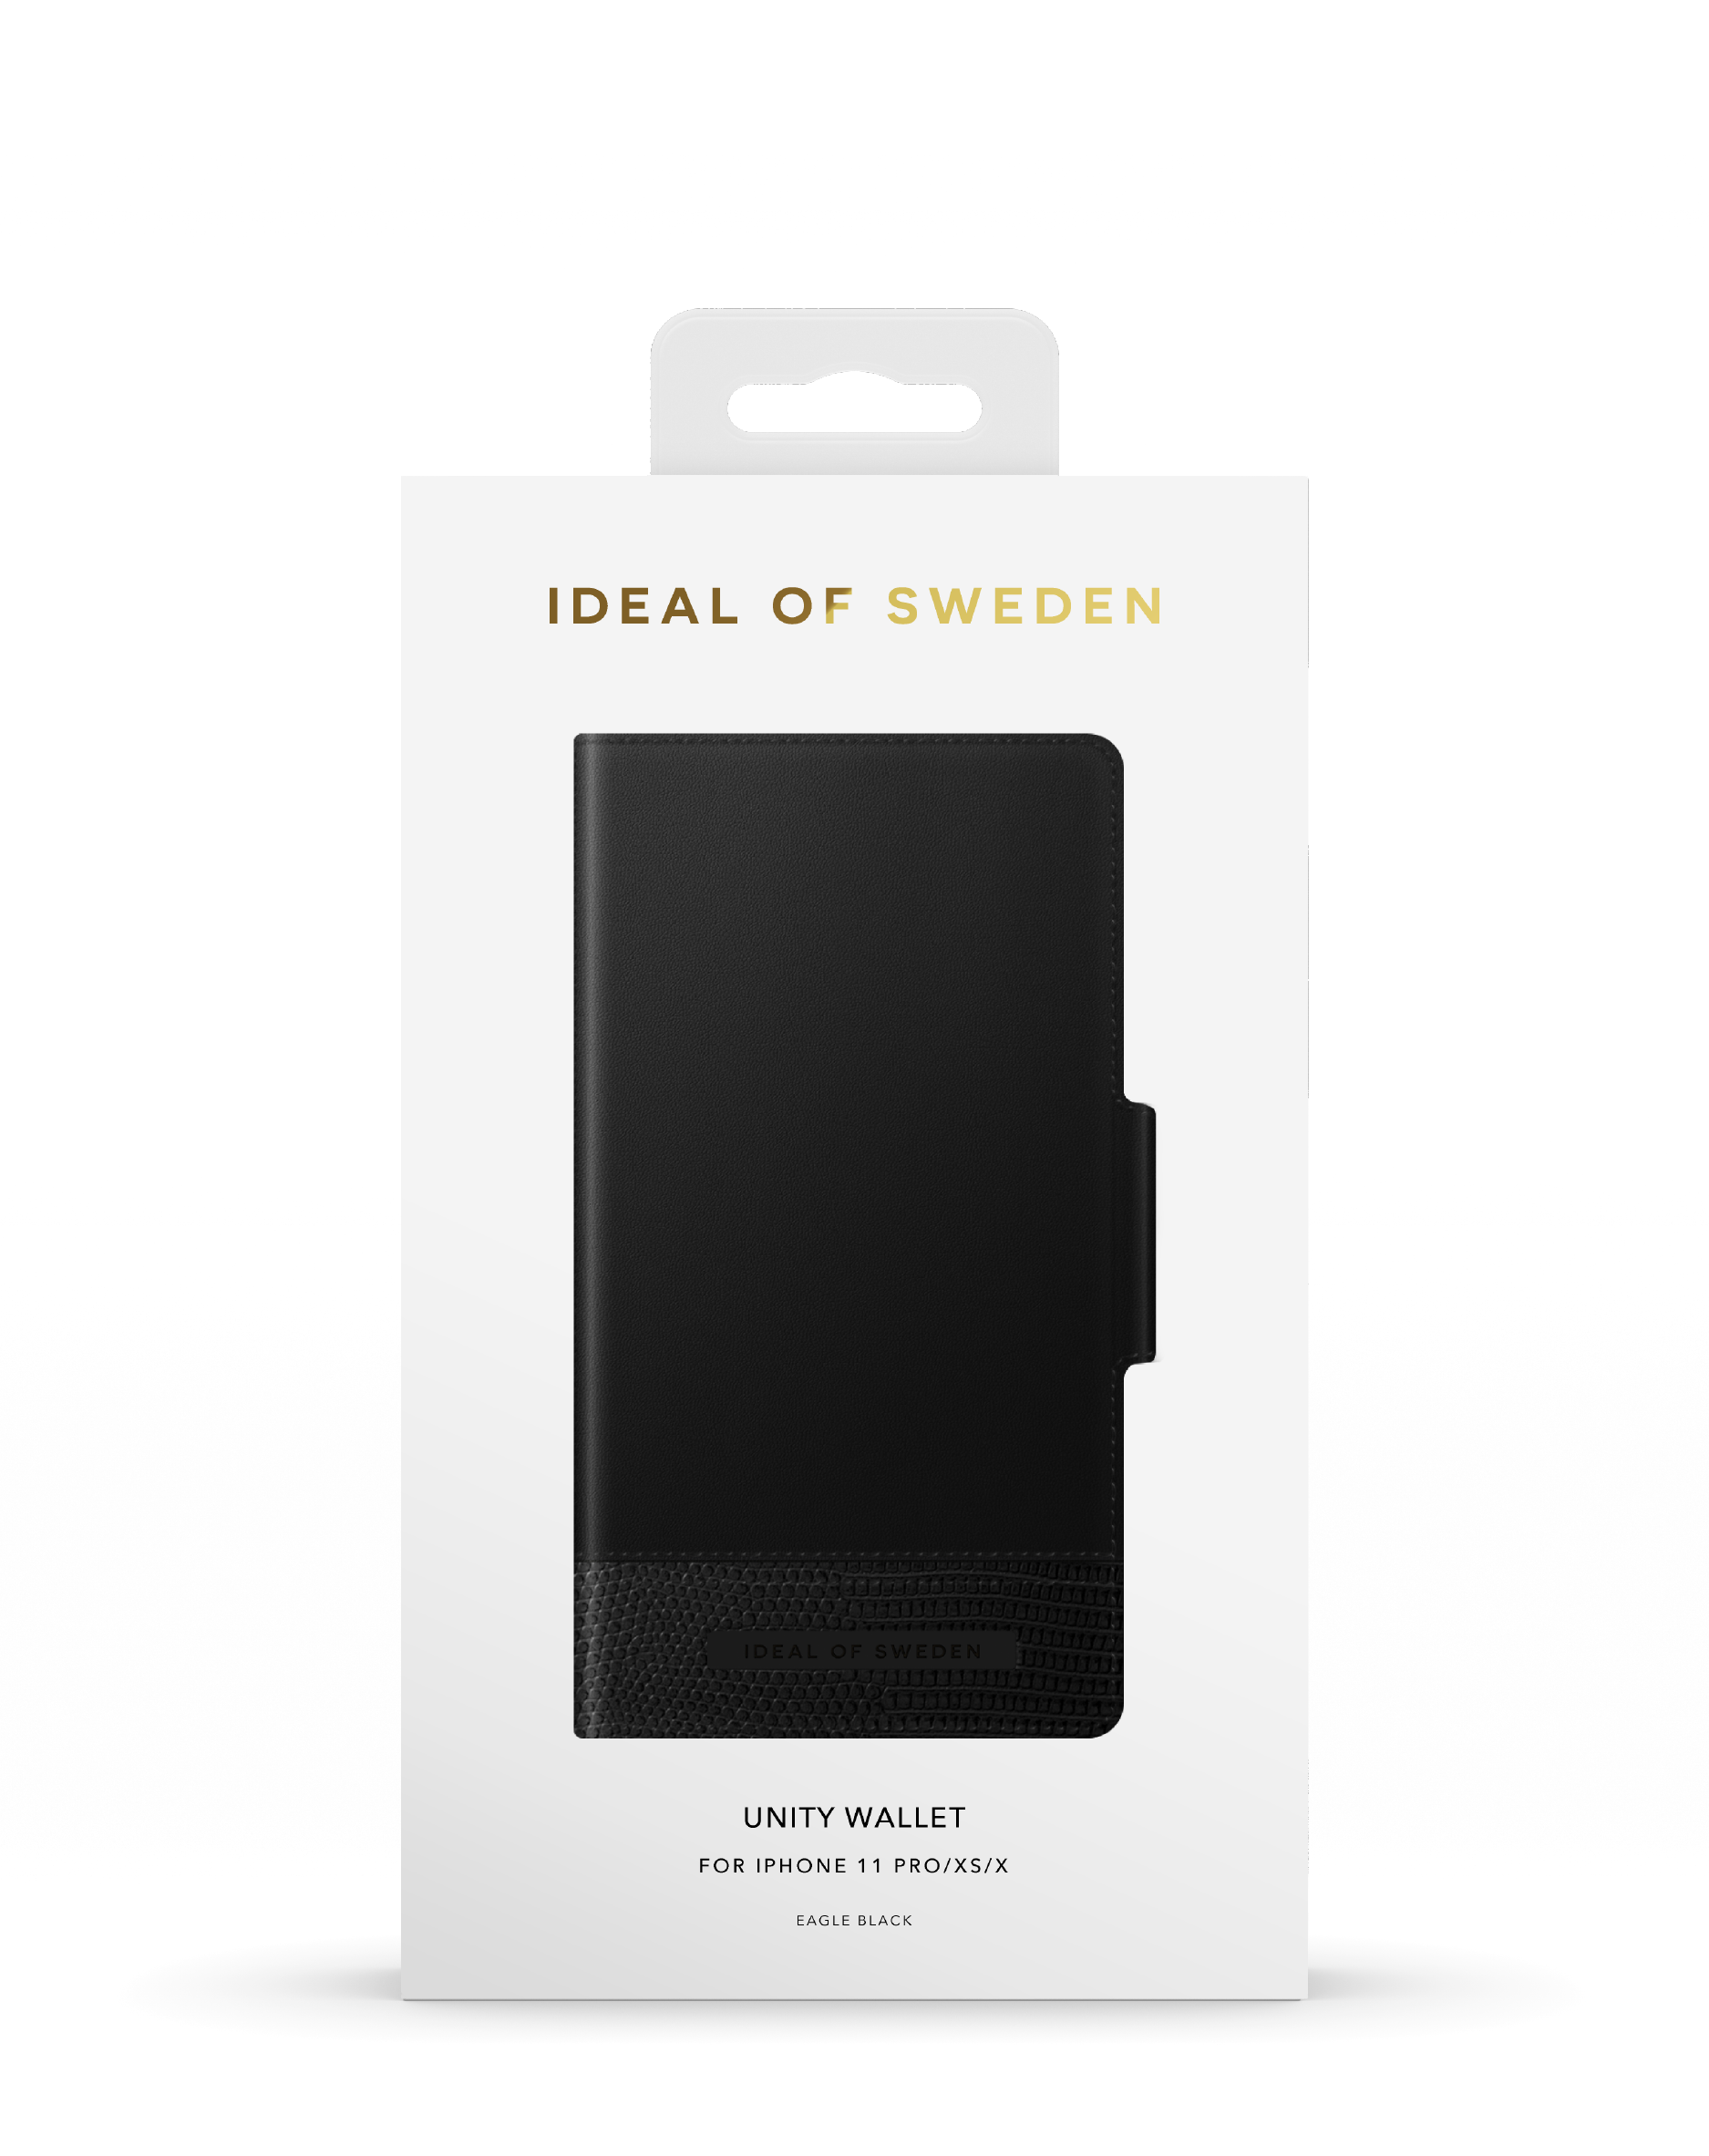 Full OF SWEDEN IDUWAW20-1958-229, Apple, Black XS, Pro, iPhone IDEAL X, 11 Cover, Eagle iPhone iPhone